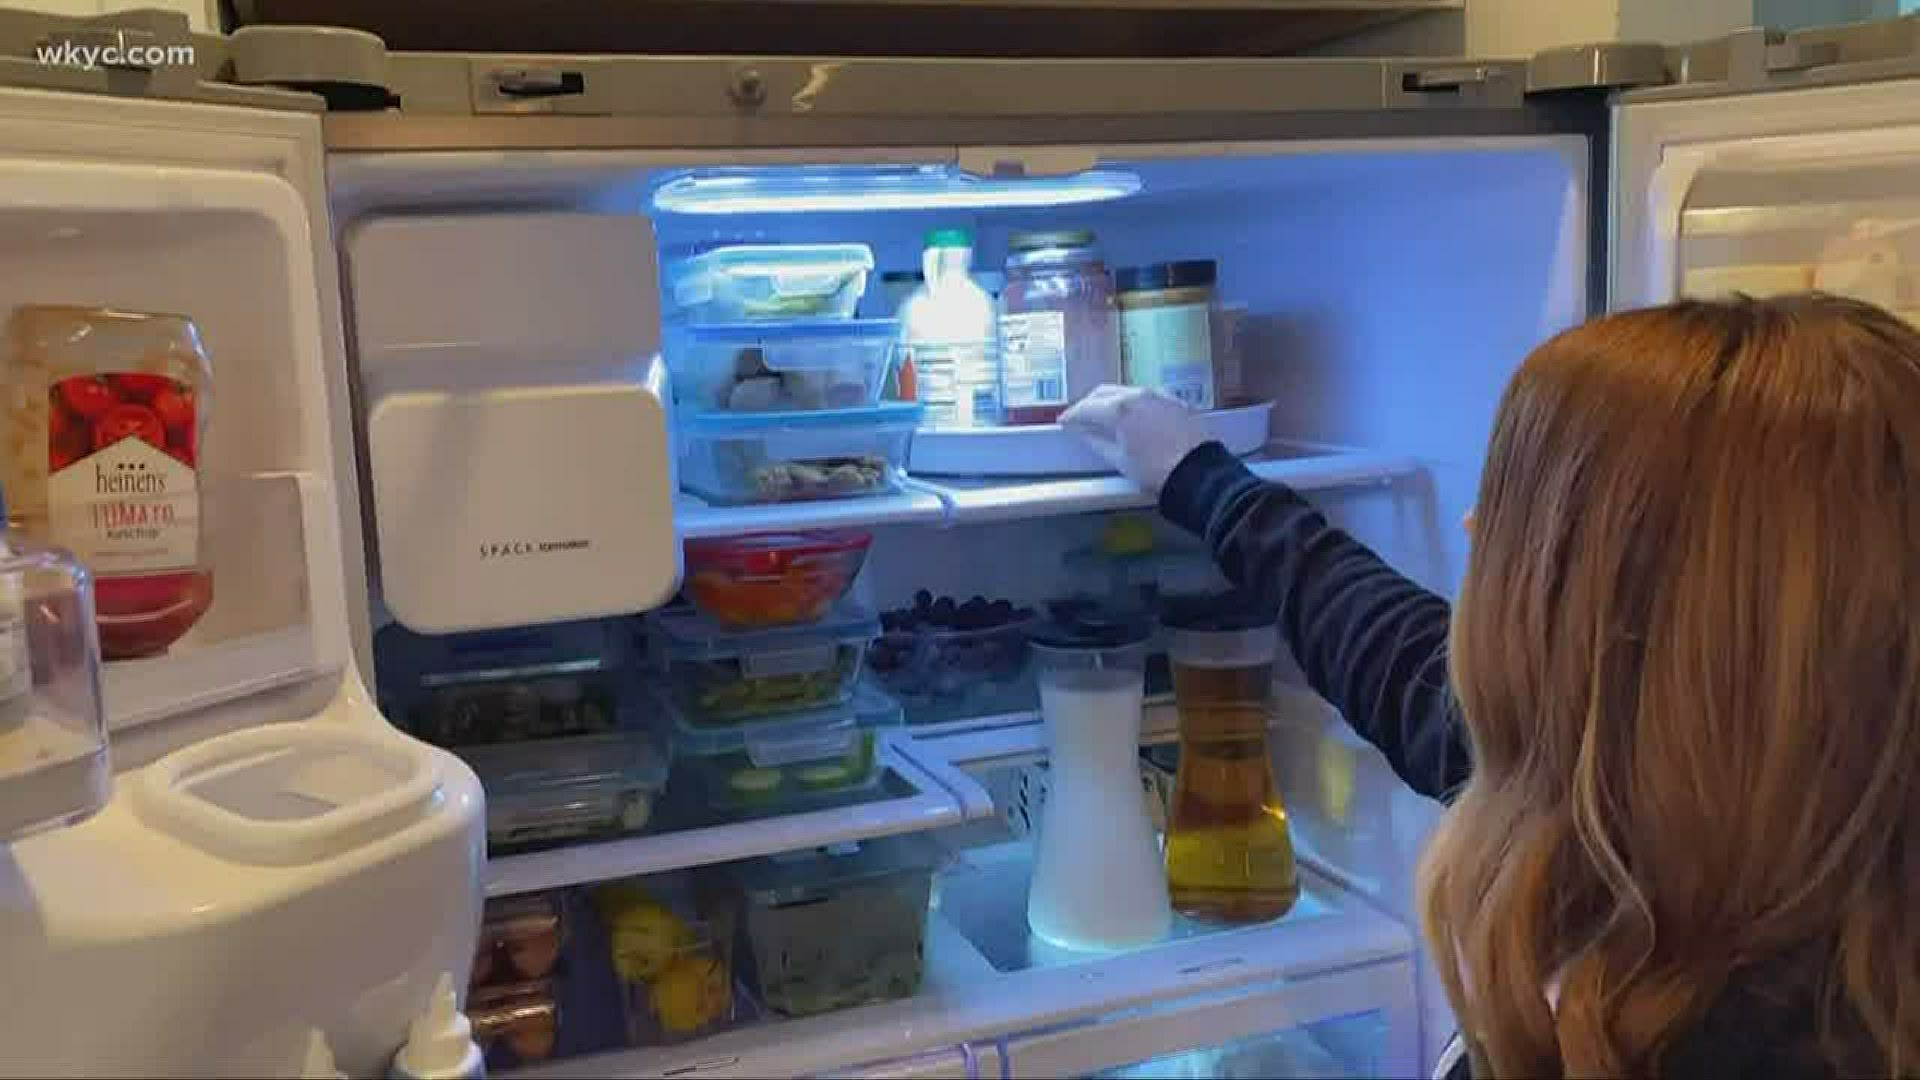 How long has it been since you cleaned out your refrigerator? Maureen Kyle has some simple tips to help get your fridge better organized.